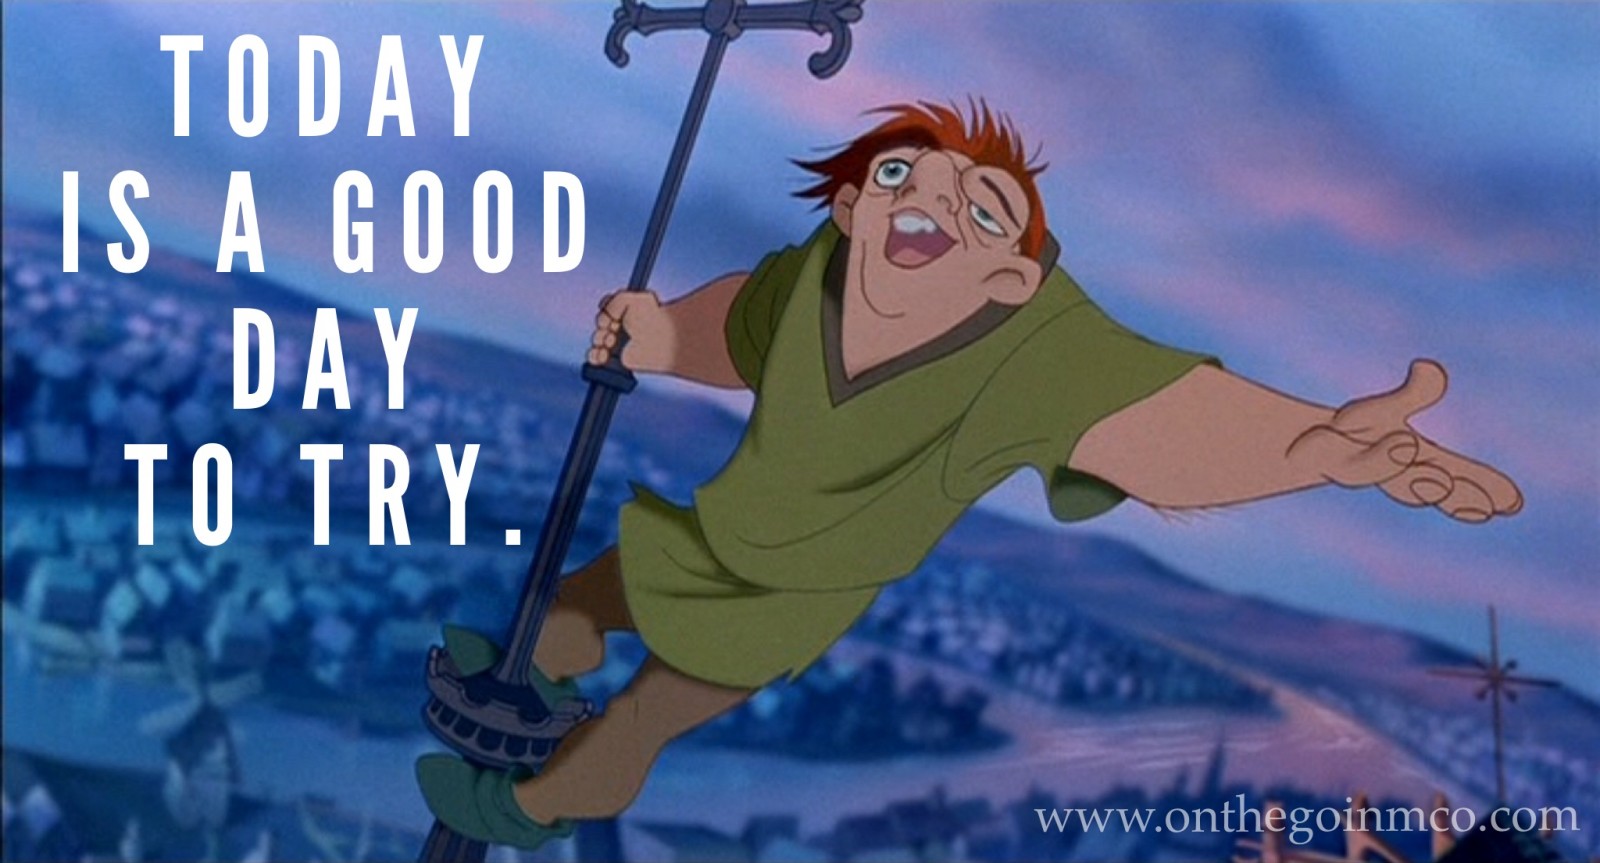 Disney Quotes Motivating Monday The Hunchback of Notre Dame